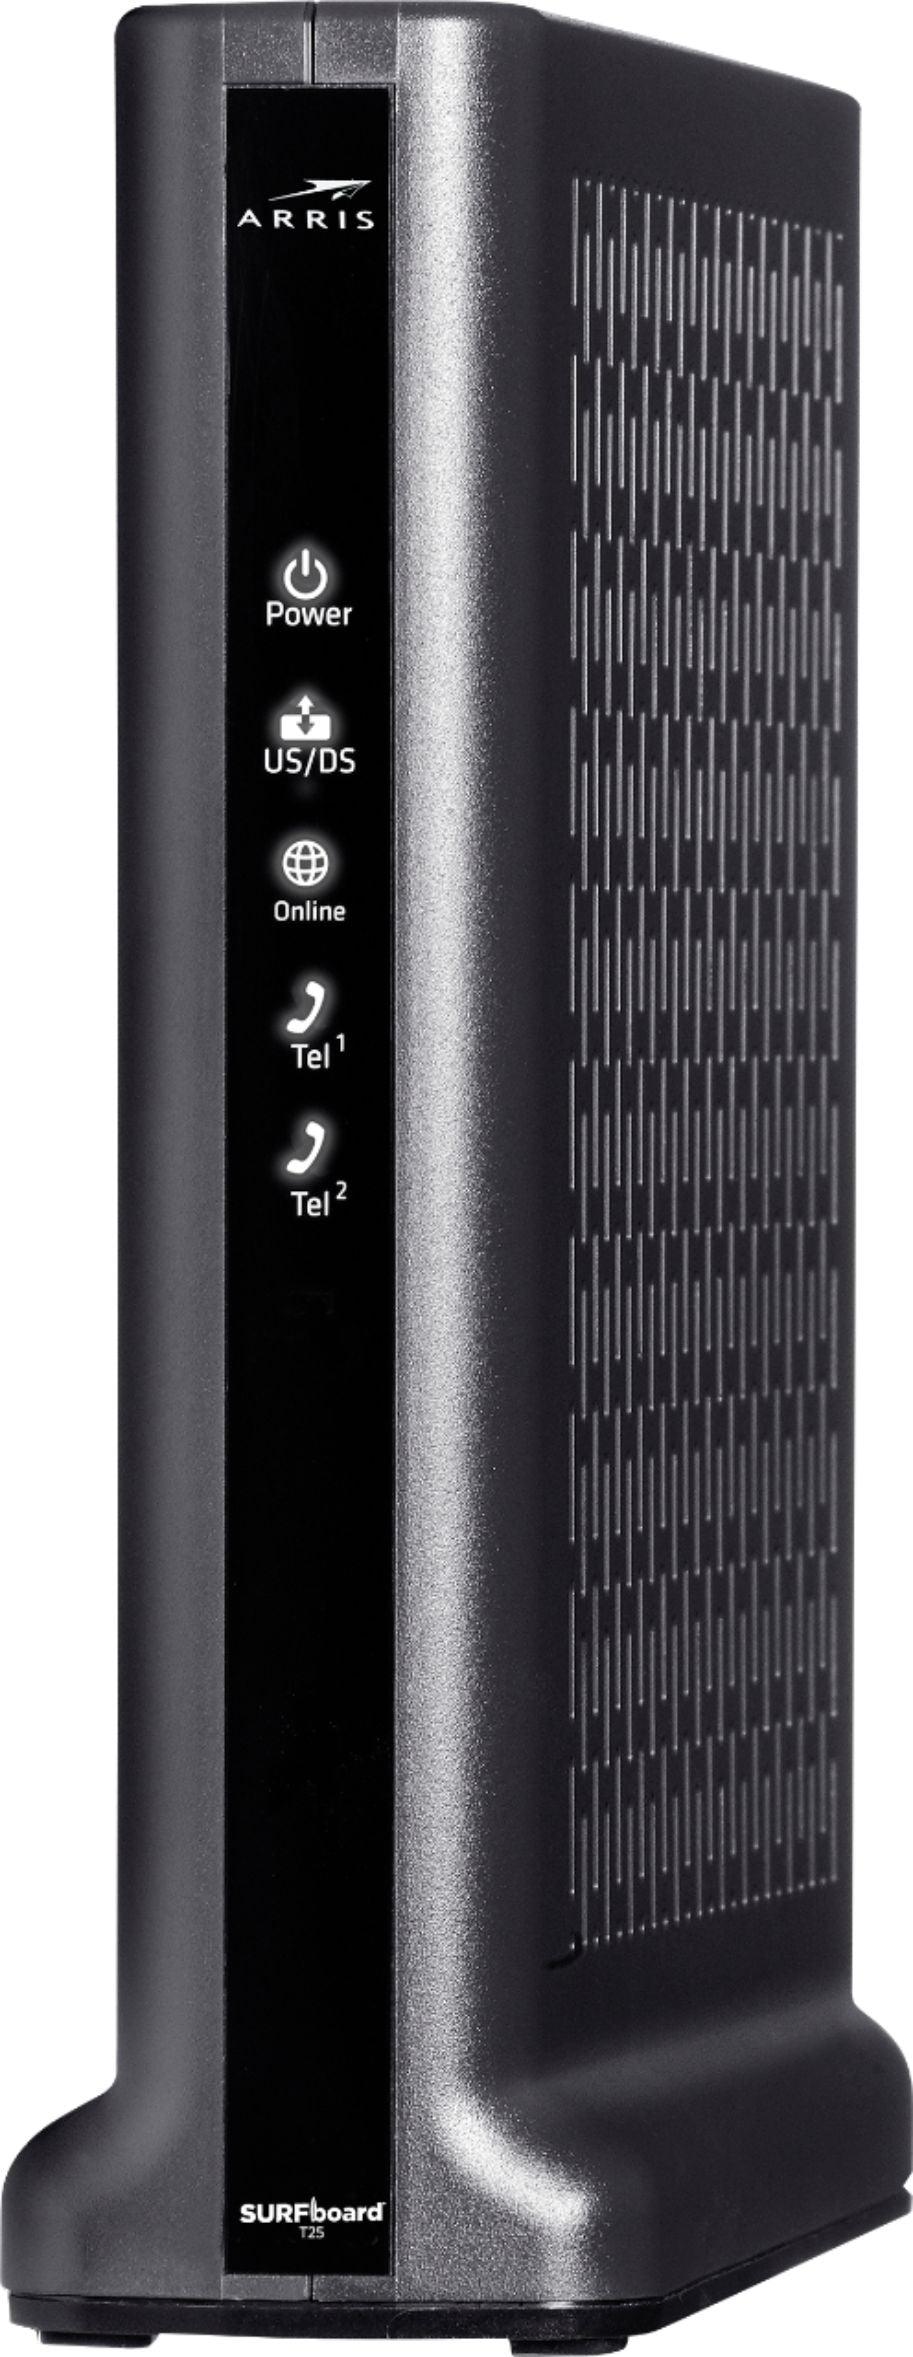 High Speed Cable Modem with Phone - NVIZI / Naples PC